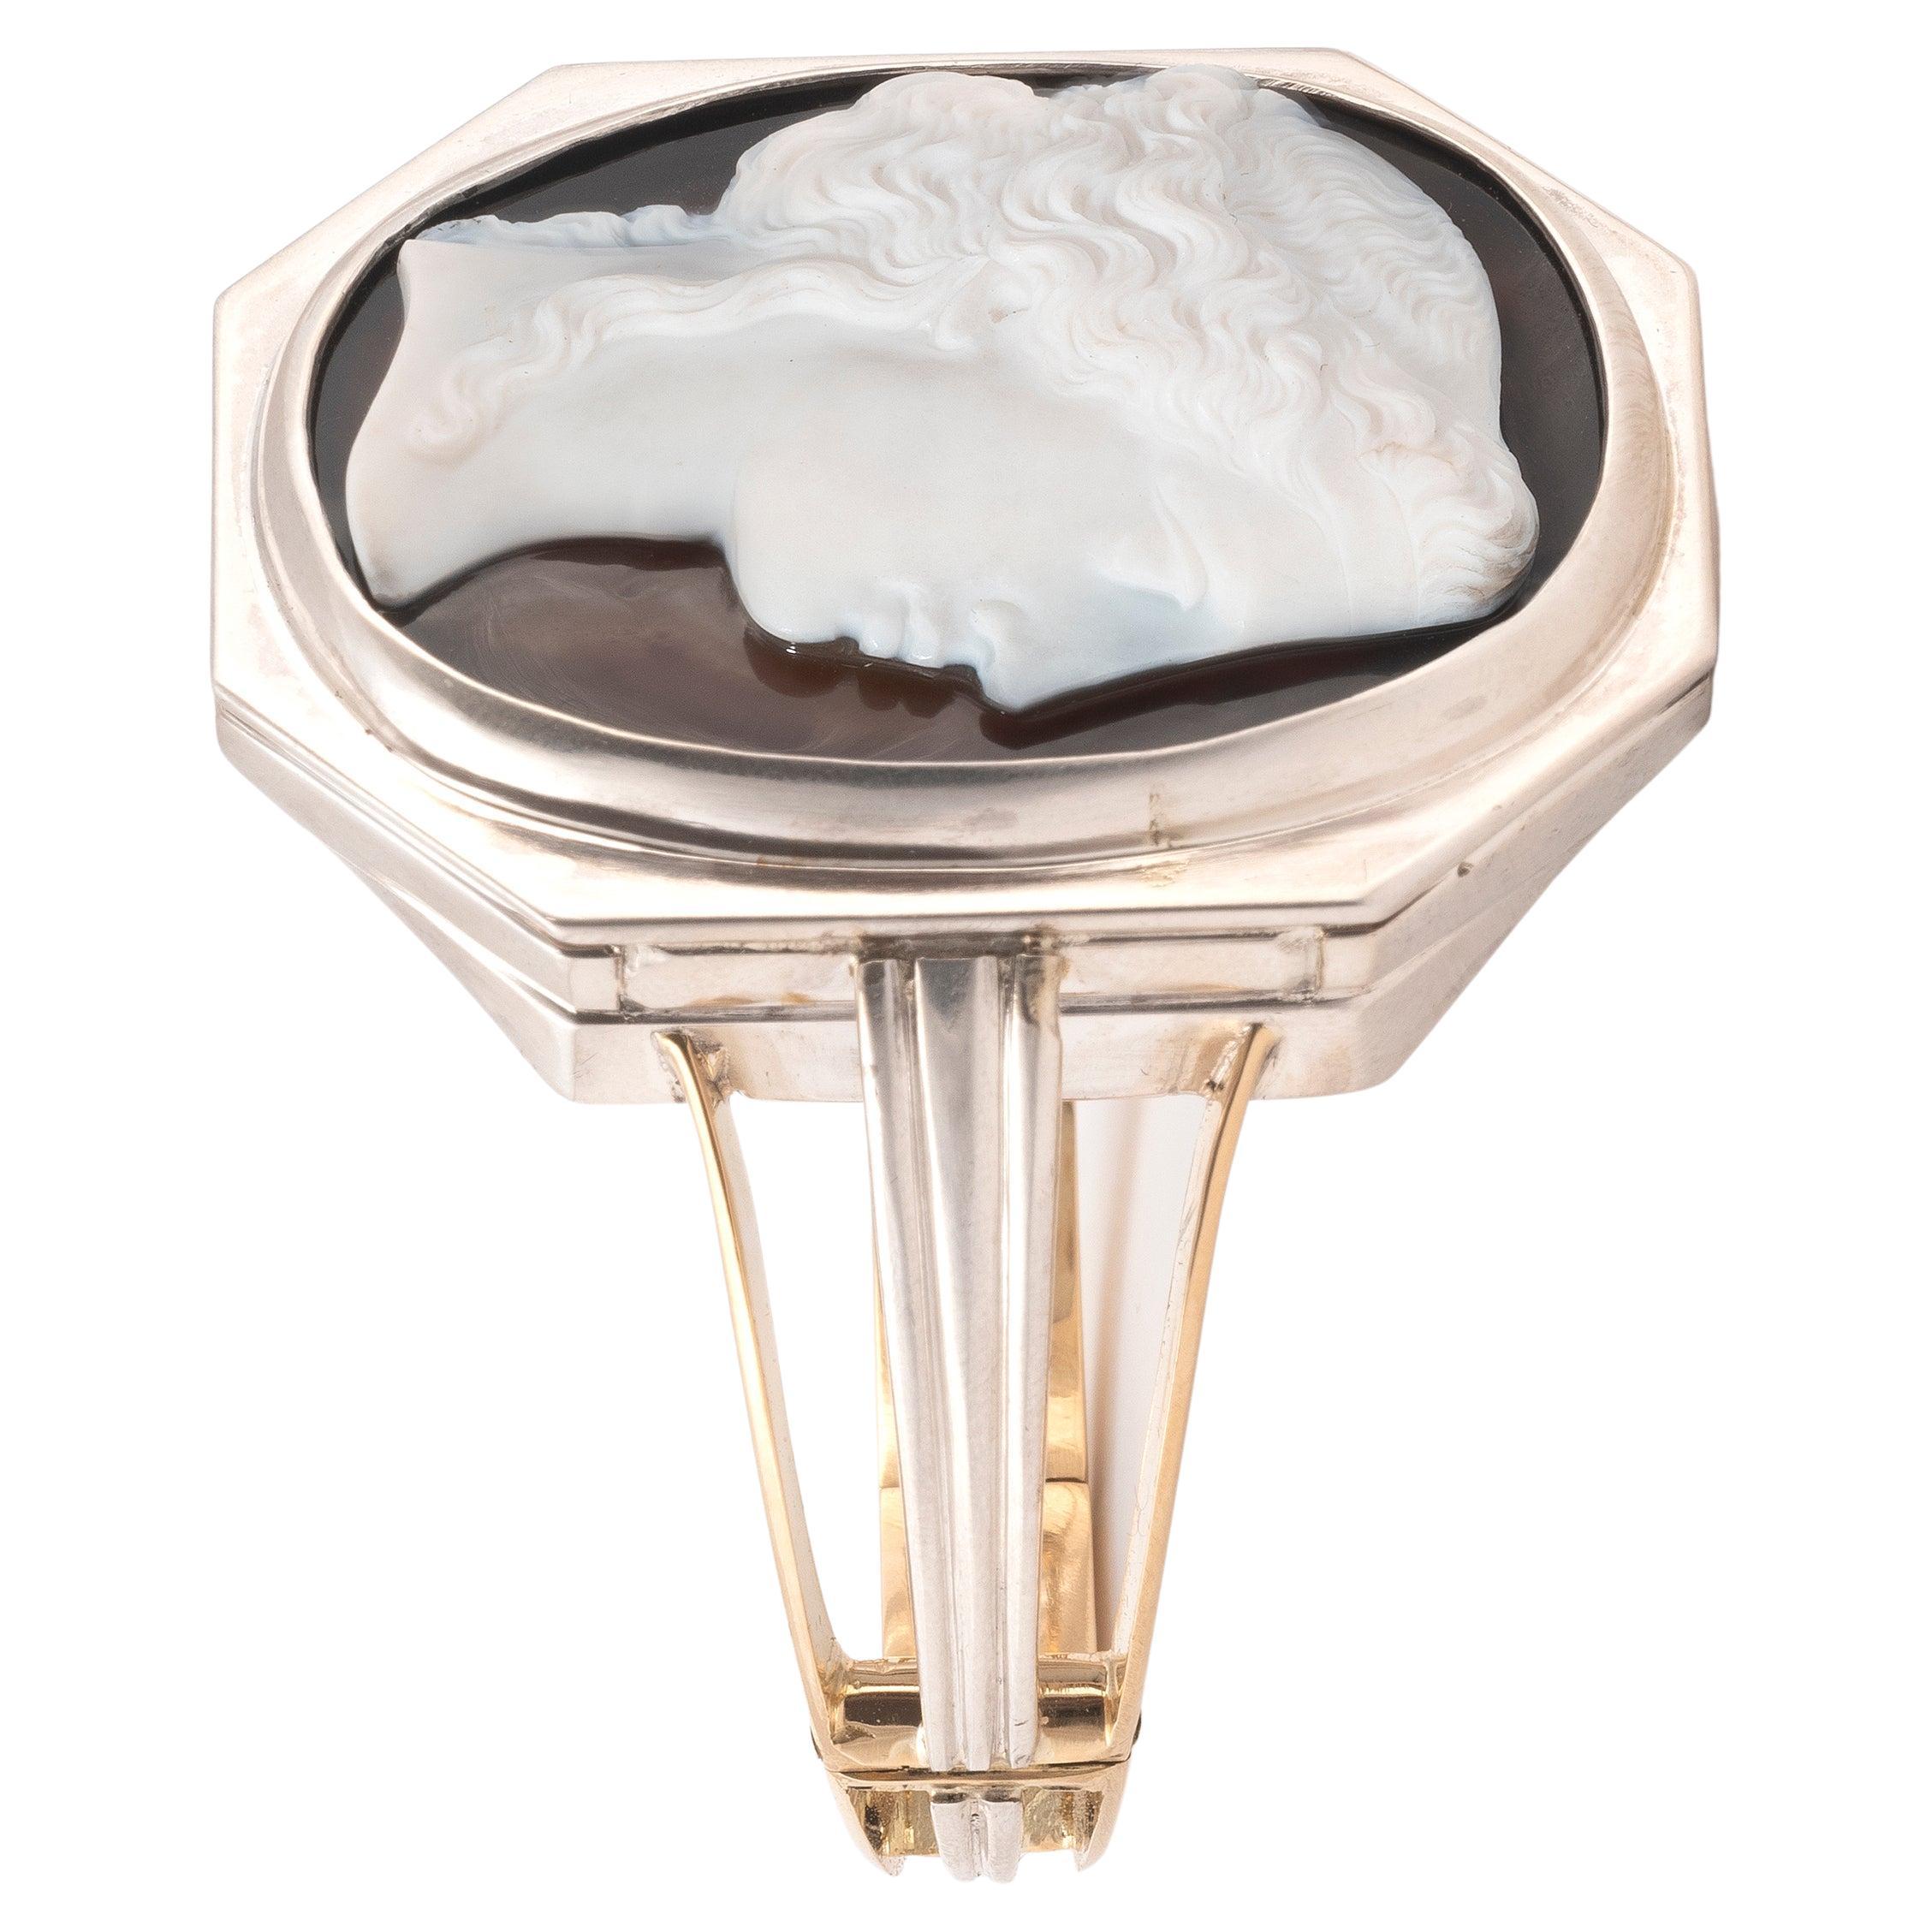 The oval cameo carved of white and black agate to depict a young maiden in three-quarters profile, with fine detailing to the flowing hair, jewelry and Empire style dress, bezel-set in 18K yellow gold and silver, hinged bangle, inner circumference